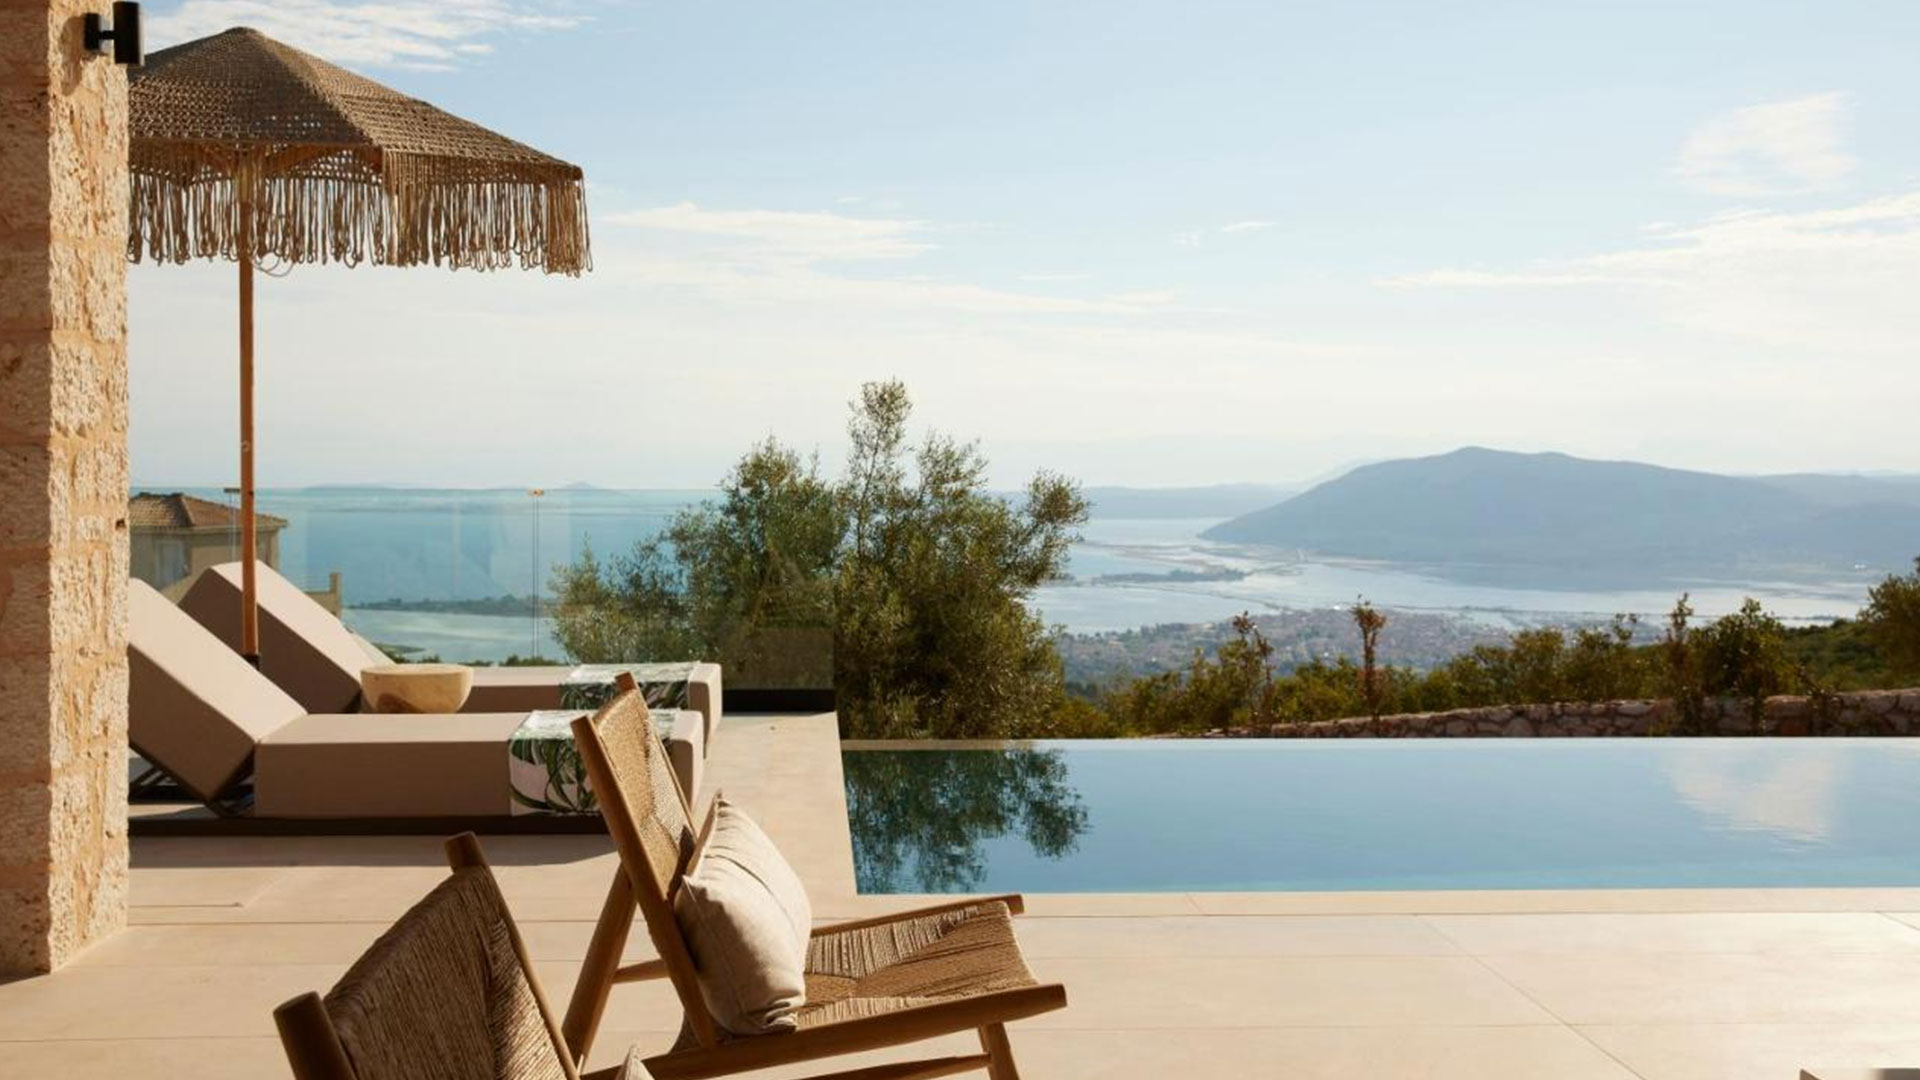 Luxurious poolside villa in Tsoukalades, Lefkada with a stunning view of the Ionian Sea.